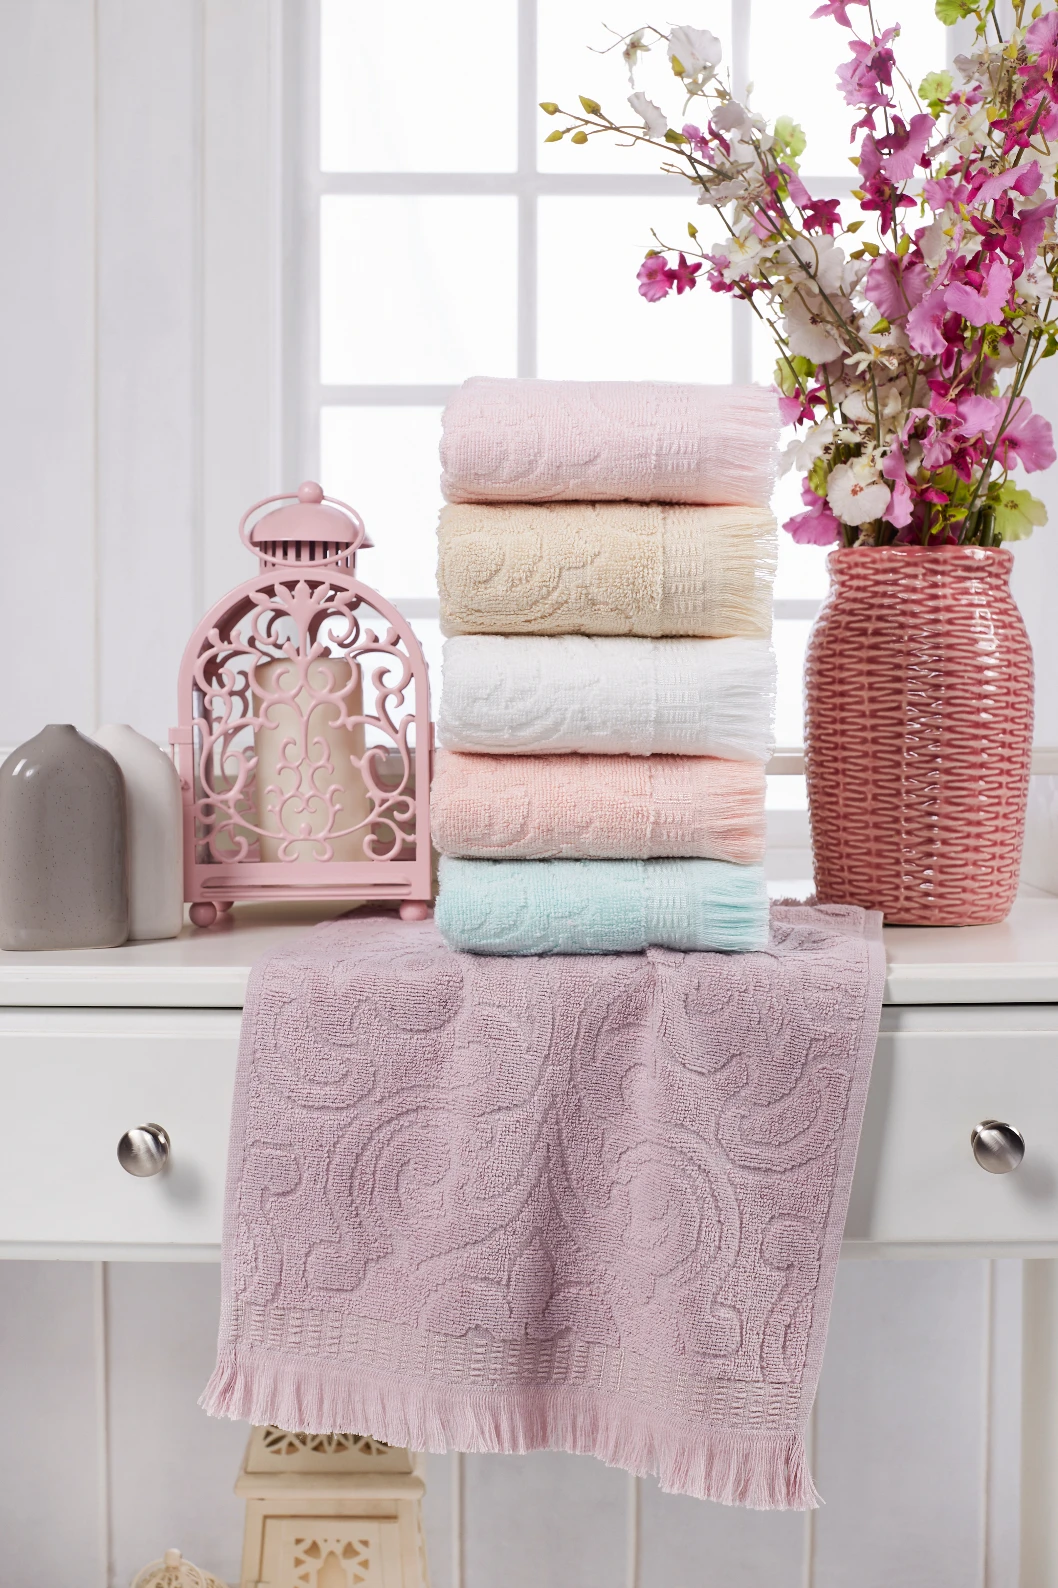 

Organic Cotton %100 Home Supplies Soft Face/Hand Towel Thick Absorbent Cloth Dishcloths Hanging Cloth Home Accessories 30*50cm